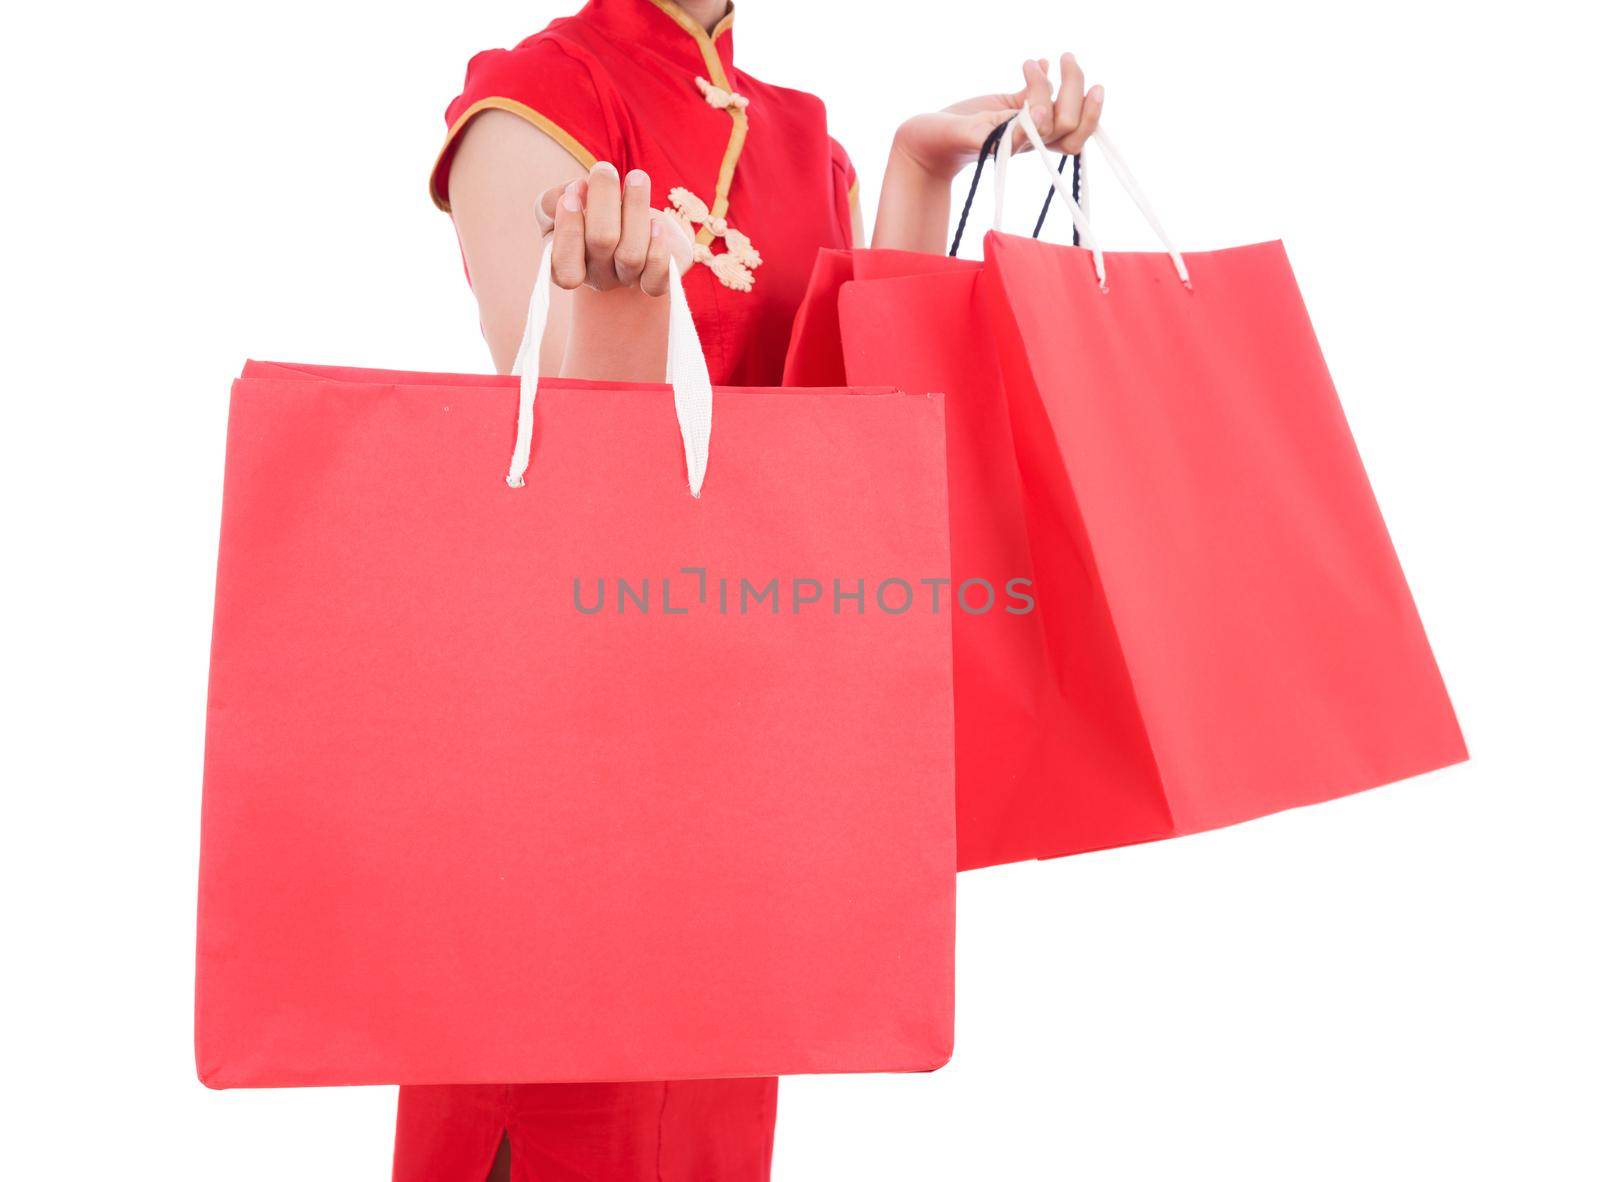 close up of shopping bag in hand of woman on chinese new year celebration isolated on a white background